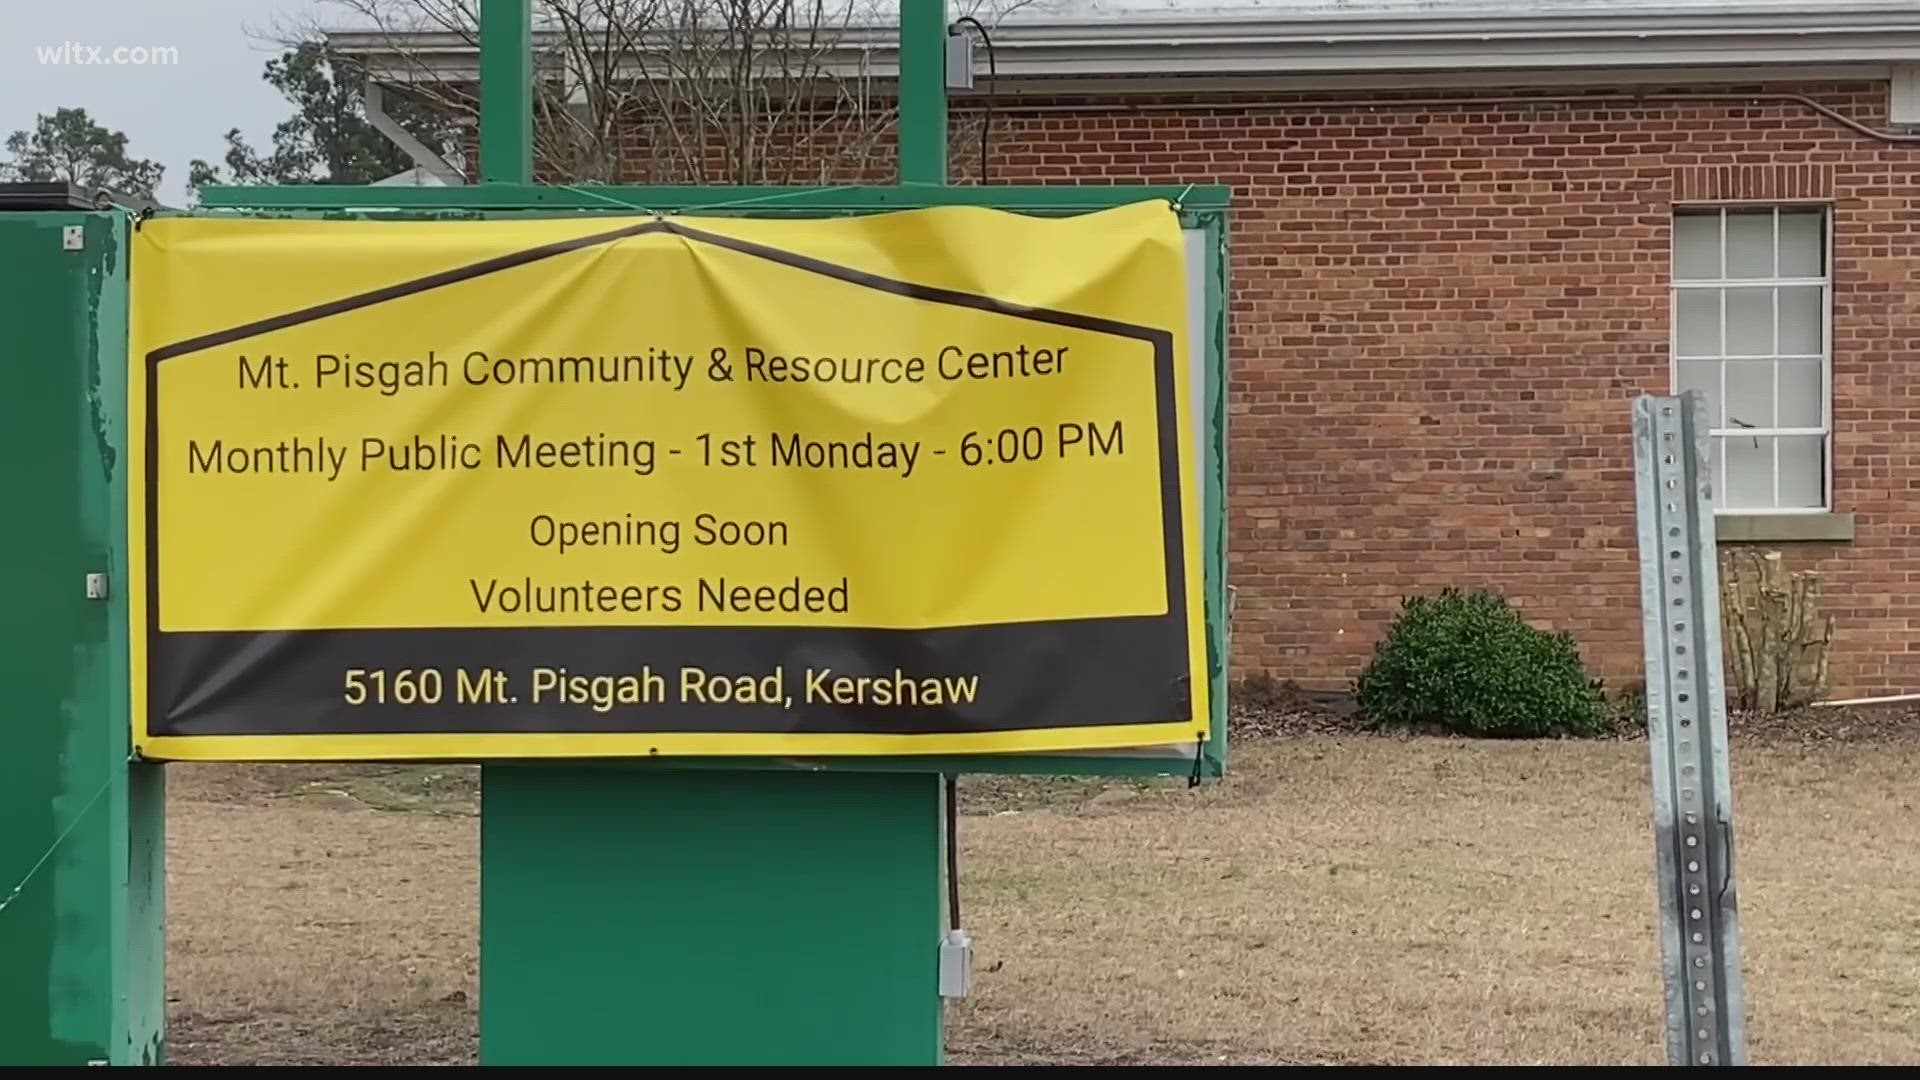 The former Mt. Pisgah Elementary school is entering it's final stages before it becomes the community and resource center.